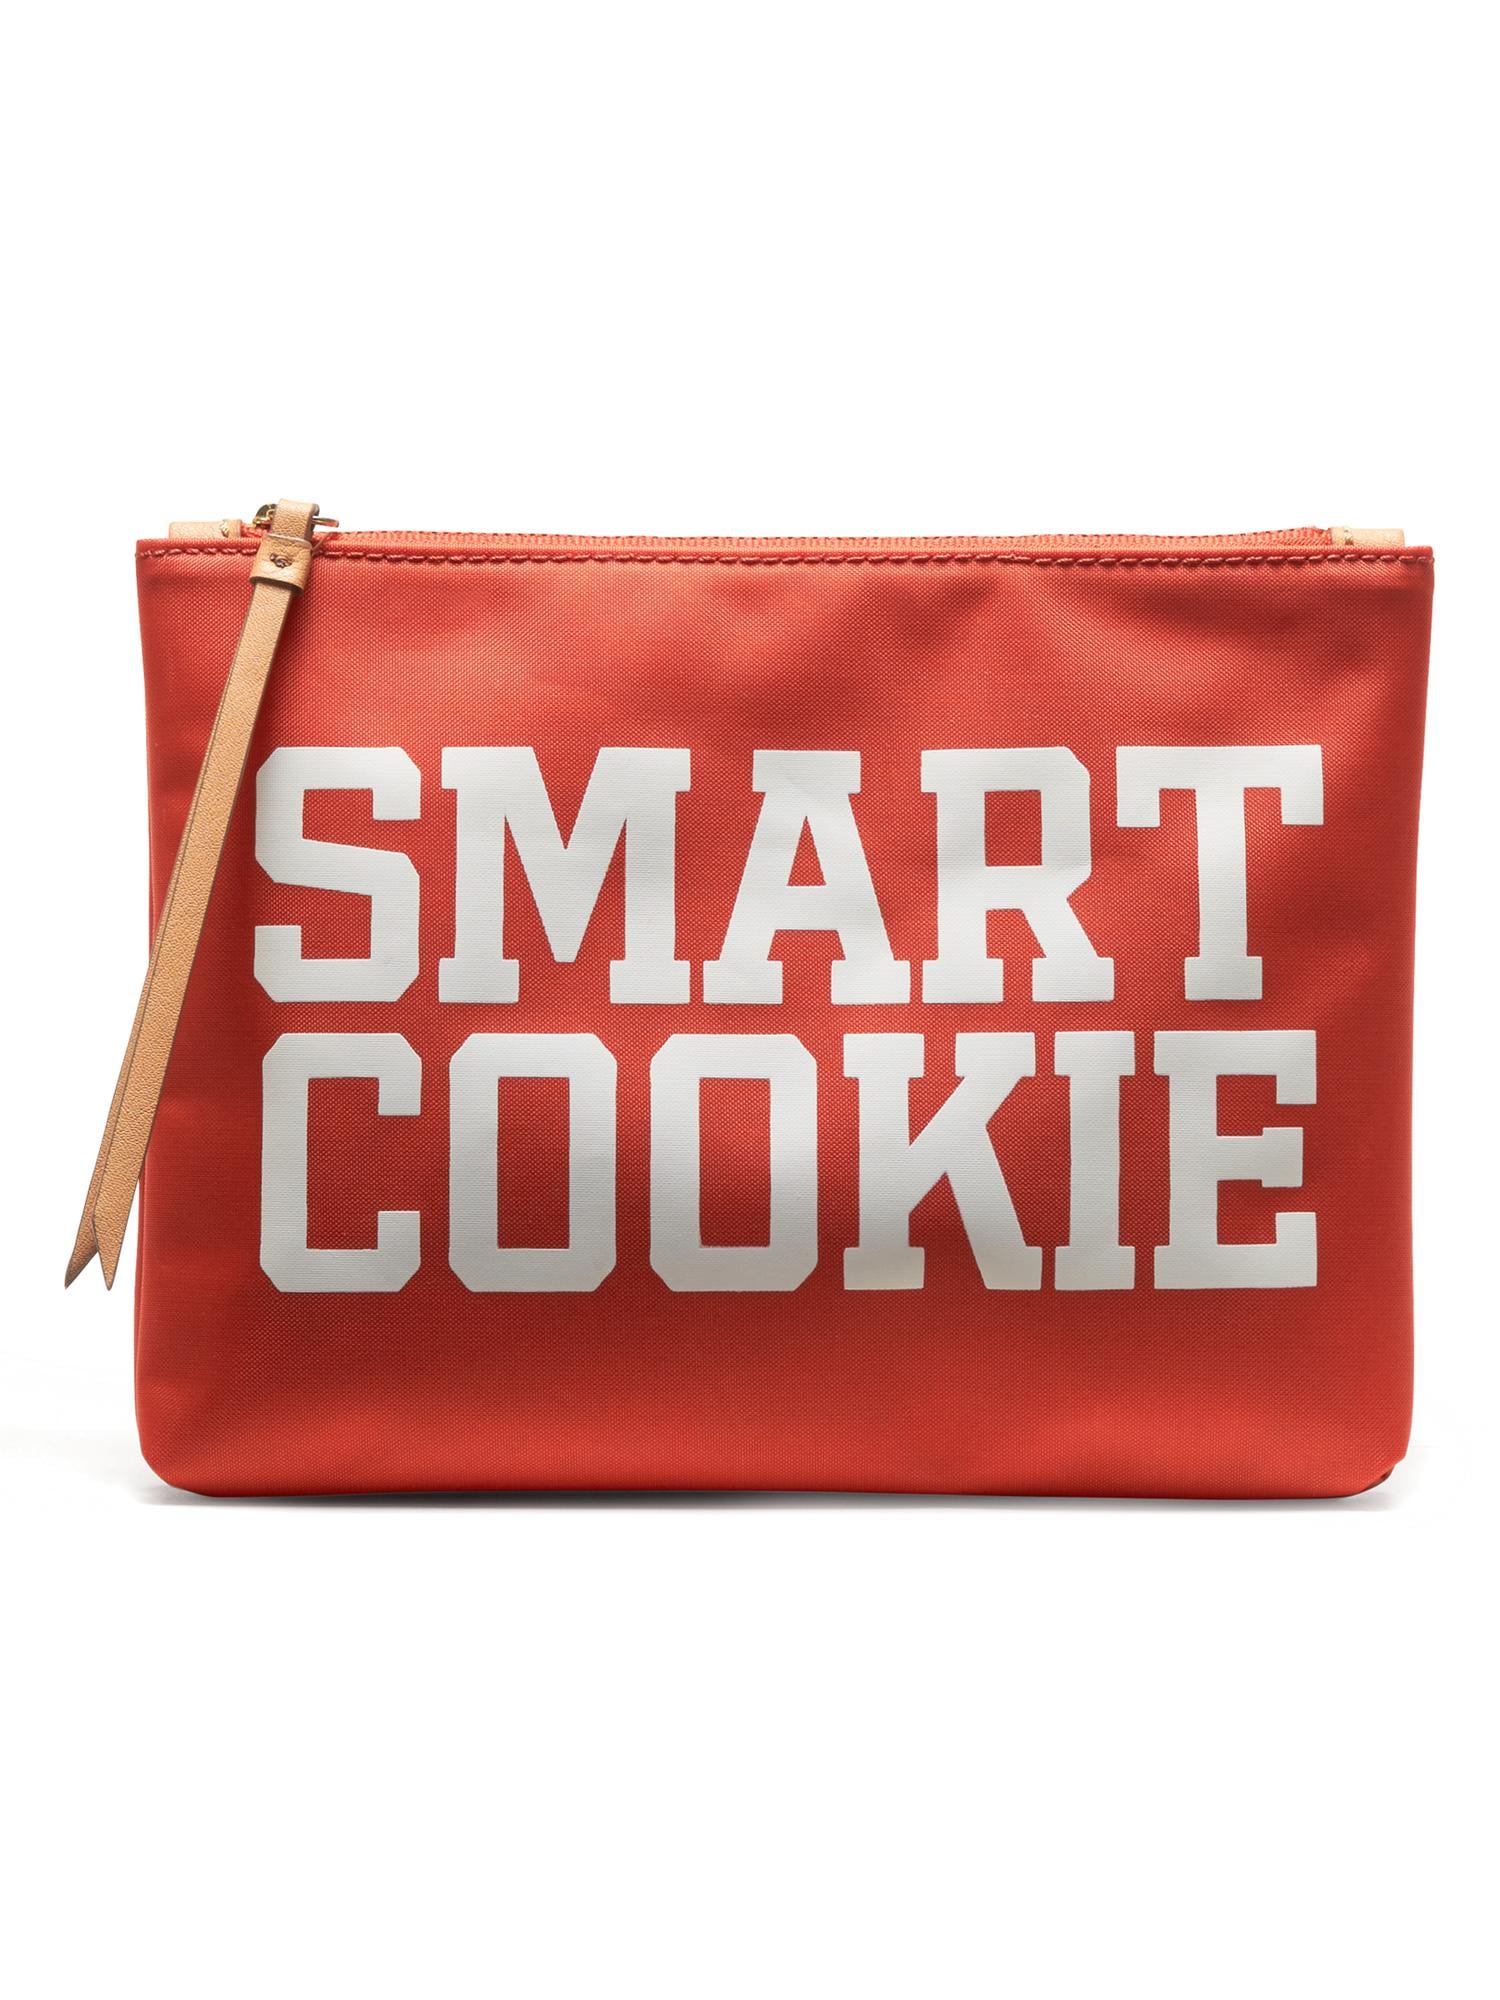 "Smart Cookie" Pouch